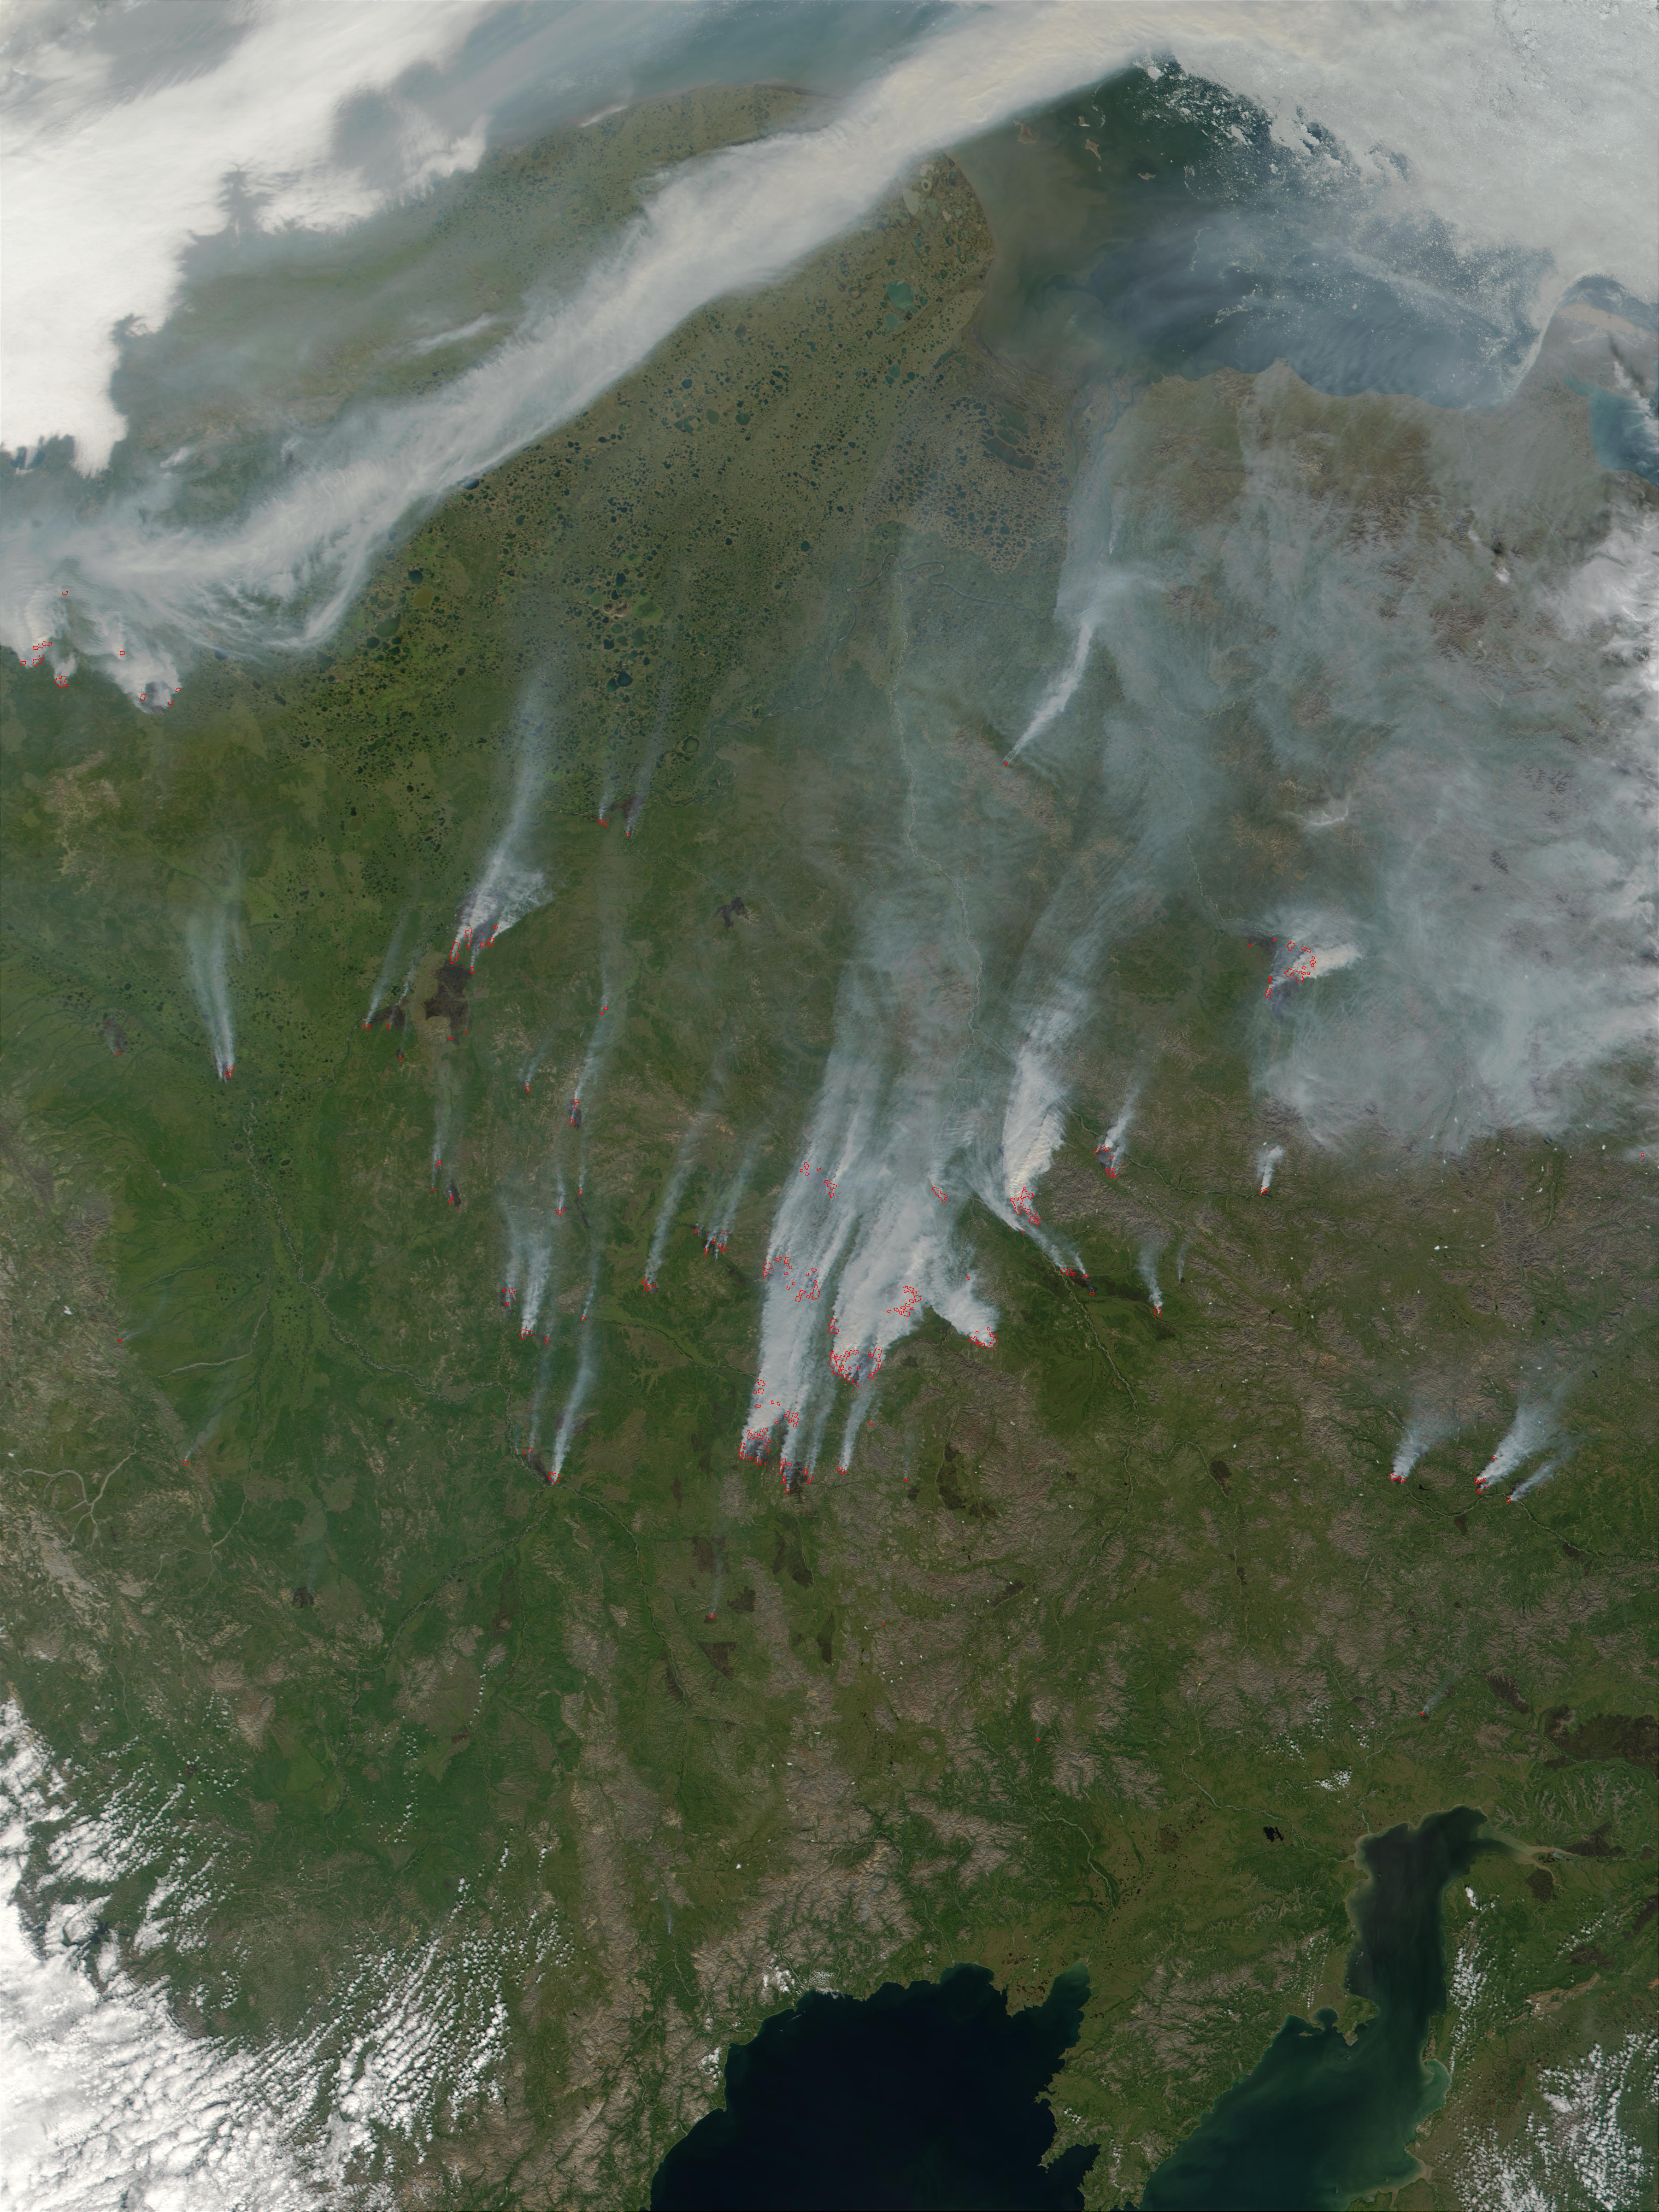 Smoke and wild fires in Eastern Siberia, Russia - related image preview